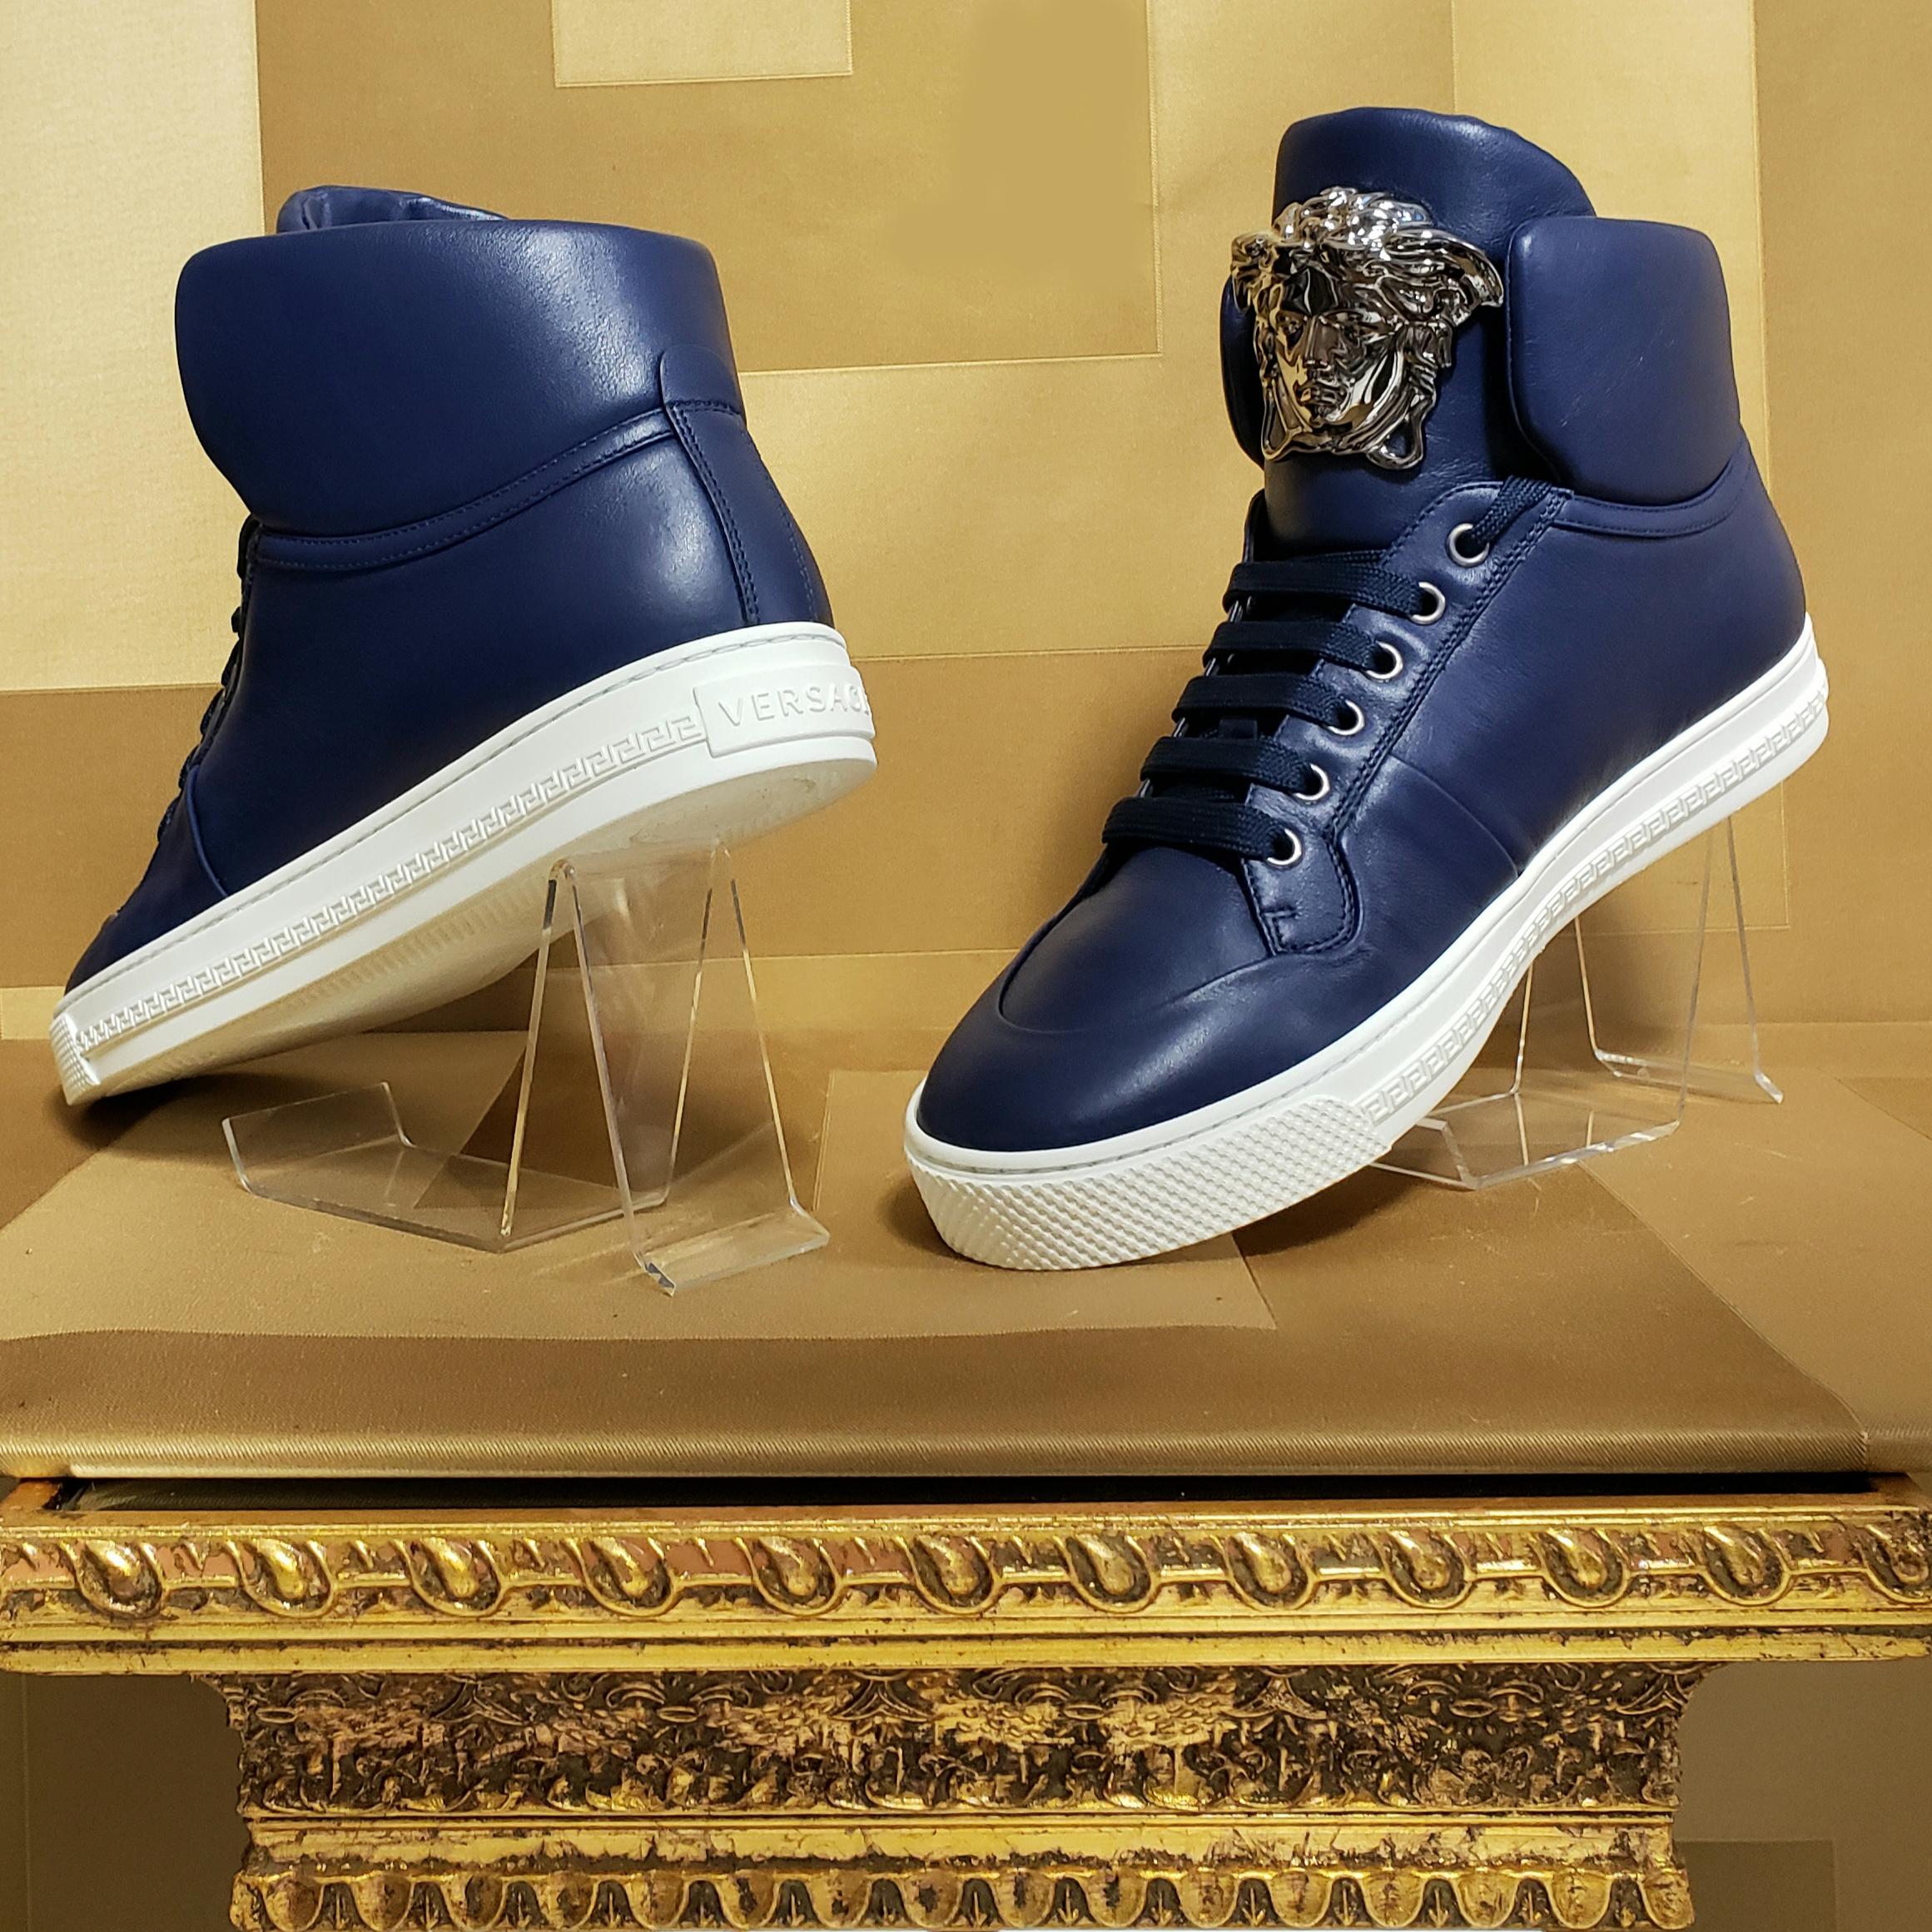 VERSACE DARK BLUE LEATHER PALAZZO HIGH-TOP Sneakers size IT39 - US 6 In New Condition For Sale In Montgomery, TX